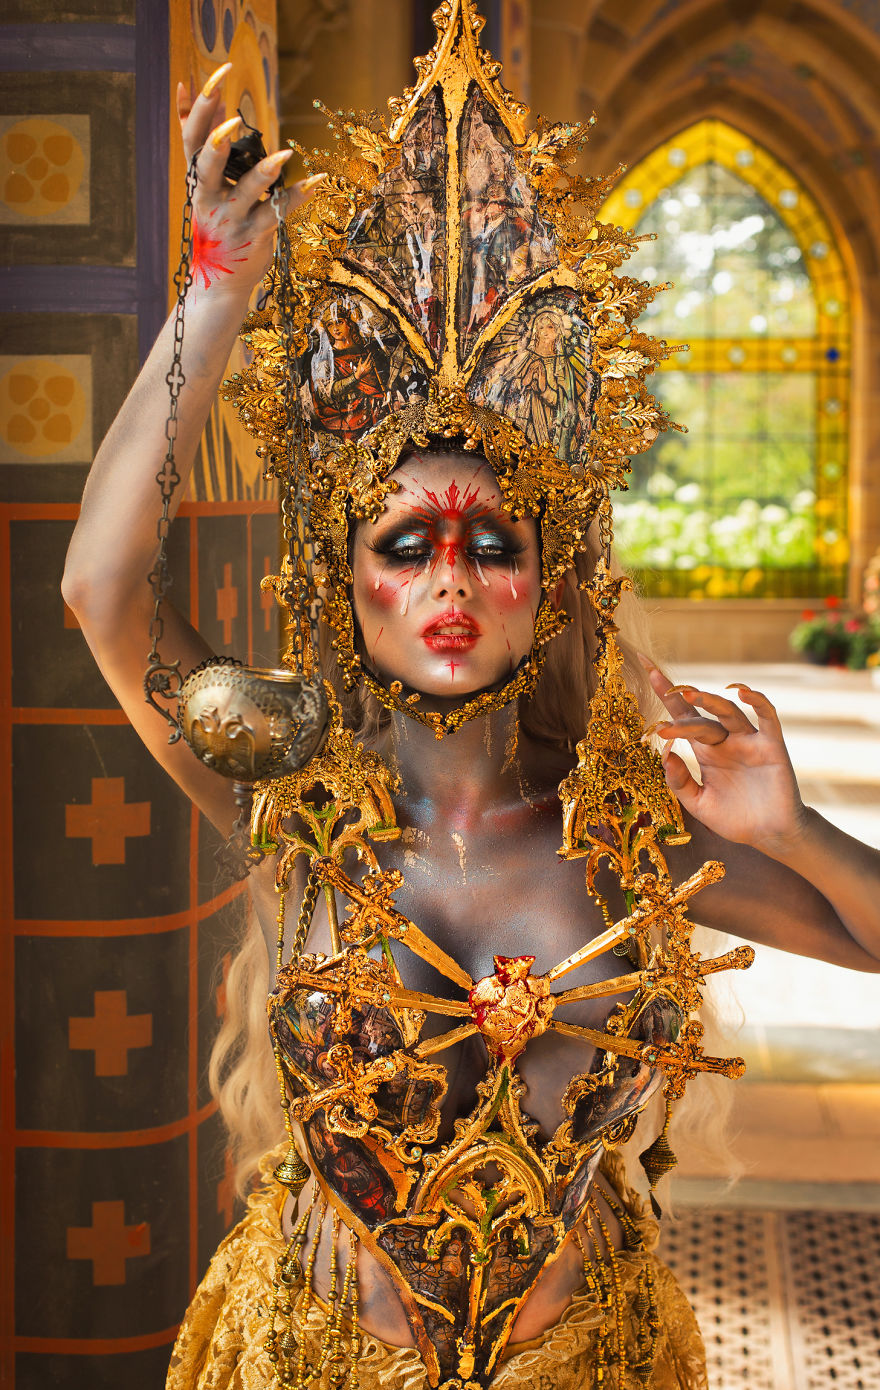 I Handmake Costumes From The Lightweight Wearable Porcelain And Stained Glass I Created, Here Are My Best Costume Designs (New Pics)